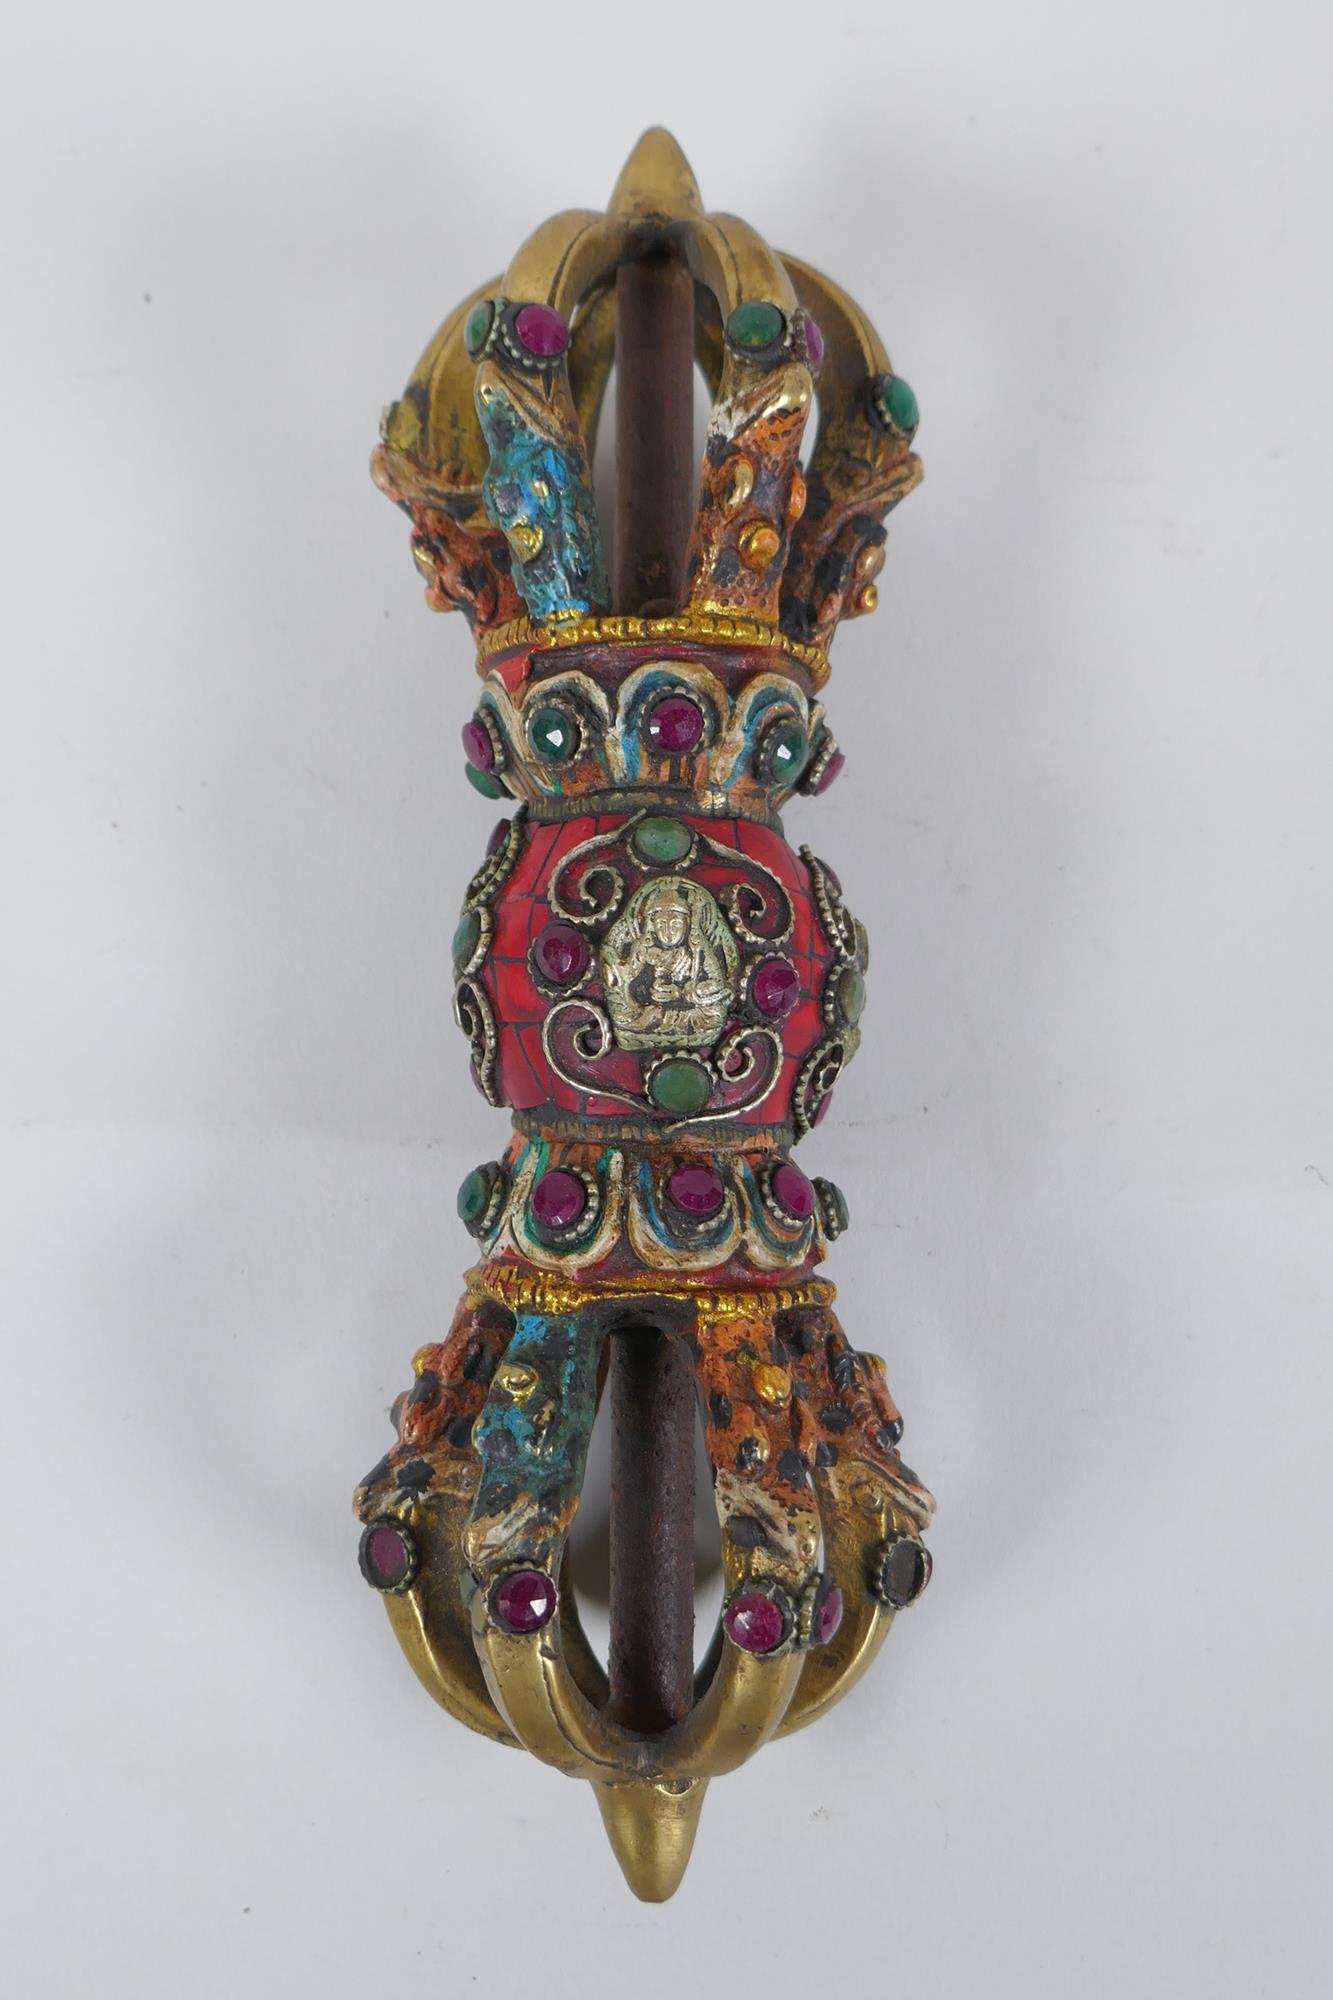 A Tibetan ceremonial bronze vajra with painted details and stone settings, 23cm long